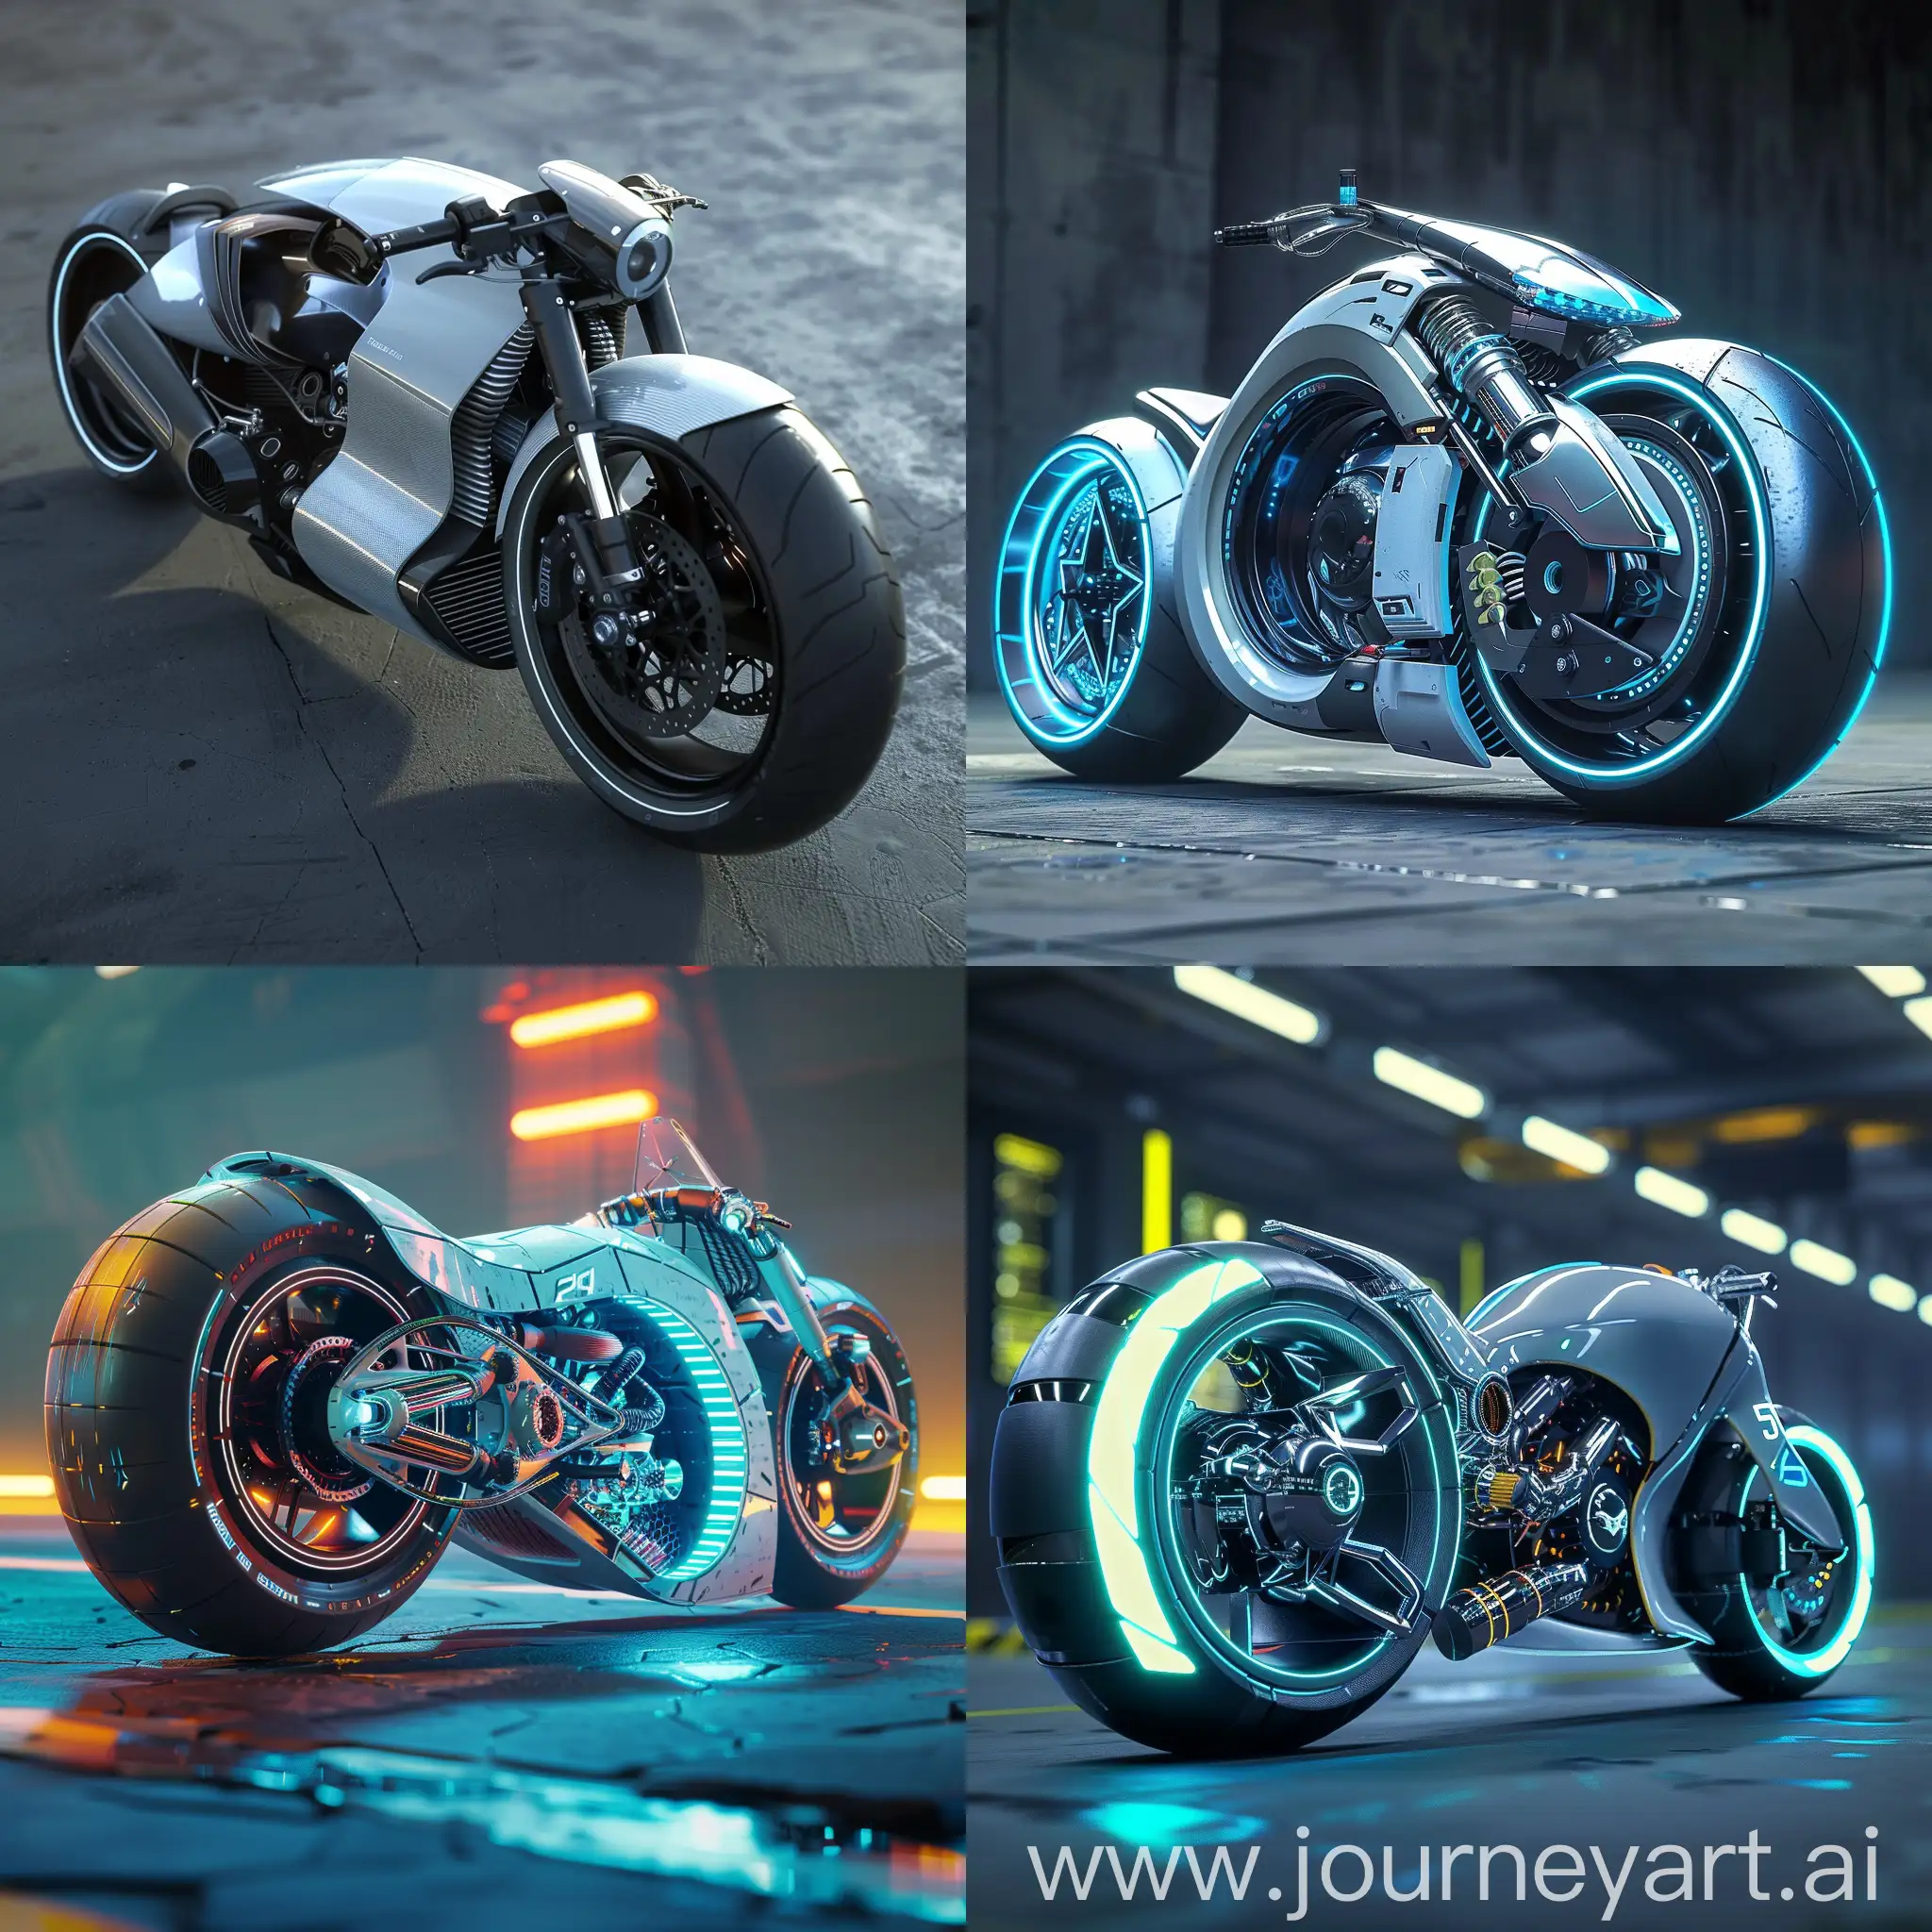 Futuristic motorcycle, in futuristic style, Advanced Electric Powertrains, Integrated AI Systems, Advanced Suspension Systems, Next-Gen Braking Systems, Enhanced Connectivity, Lightweight Materials, Adaptive Aerodynamics, Enhanced Safety Features, High-Performance Engines, Smart Tires, Adaptive LED/Matrix Lighting Systems, Aerodynamic Enhancements, Advanced Display Systems, Modular Design, Integrated Cameras and Sensors, Smart Tire Systems, Ergonomic and Adjustable Components, Advanced Materials and Finishes, Enhanced Connectivity Features, Energy-Efficient Lighting, Shape Memory Alloys (SMAs), Electroactive Polymers (EAPs), Carbon Nanotube Composites, Self-Healing Polymers, Graphene-Infused Materials, Piezoelectric Materials, Thermoelectric Materials, Biodegradable Composites, Liquid Metal Alloys, Smart Lubricants, Electrochromic Body Panels, Self-Healing Paint and Bodywork, Adaptive Aerodynamic Components, Photovoltaic Panels, Graphene-Enhanced Paint and Coatings, Smart Lighting Systems, Piezoelectric Skins, Hydrophobic and Oleophobic Coatings, Thermochromic Materials, Smart Textiles and Upholstery, unreal engine 5 --stylize 1000